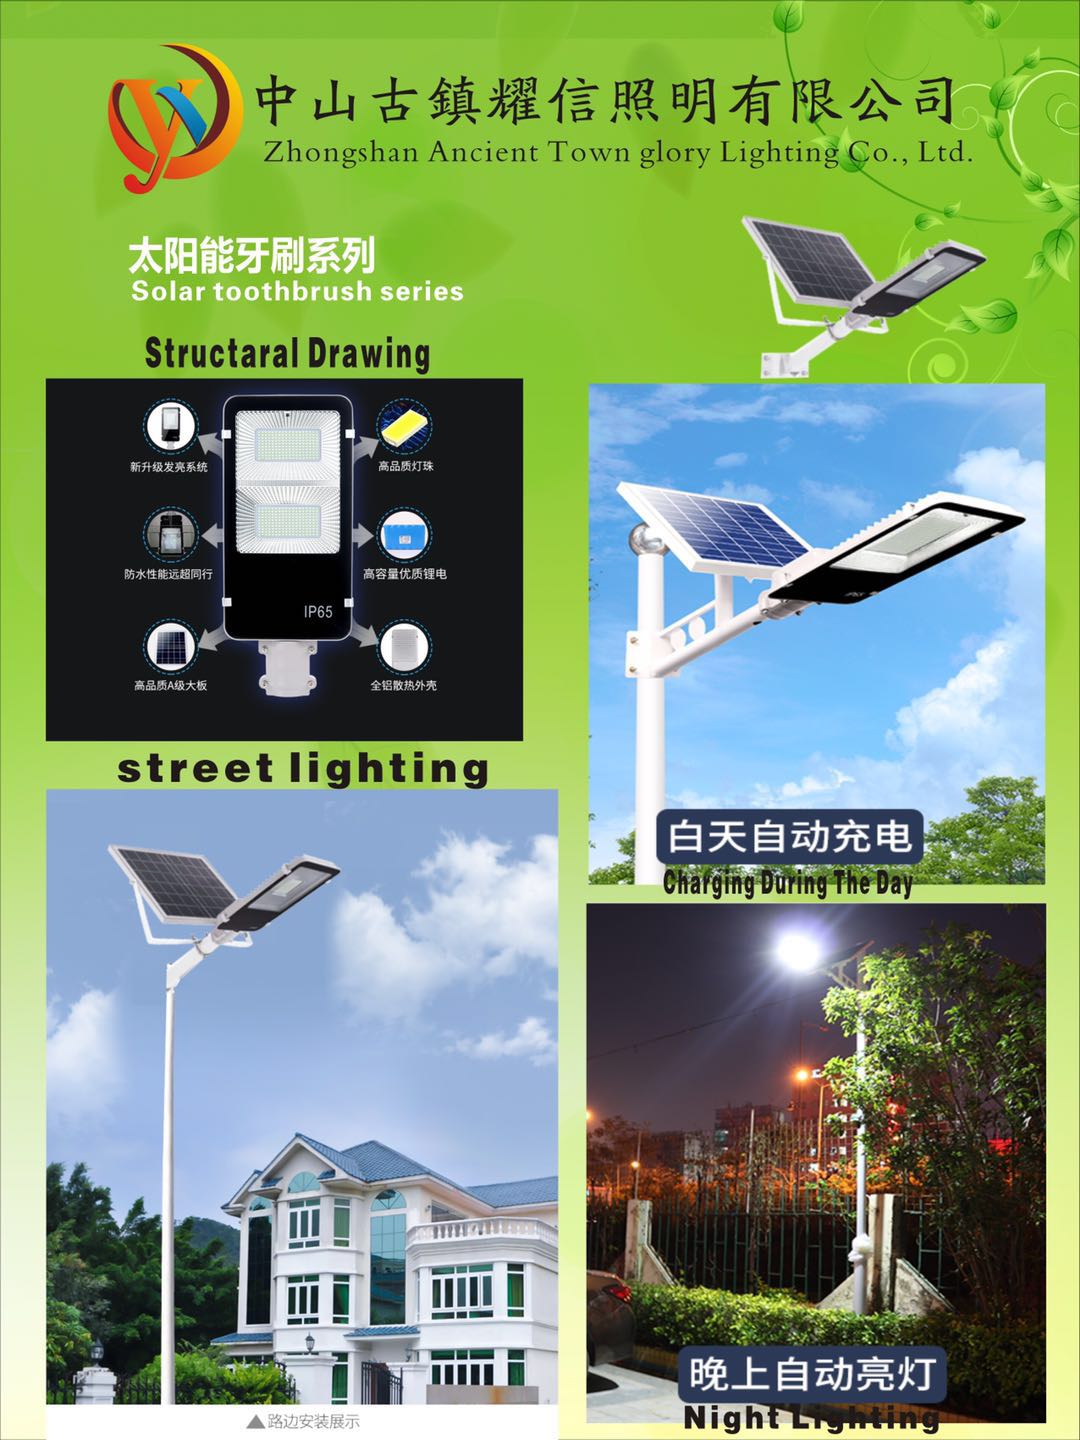 Automatic Charging Solar Toothbrush Series